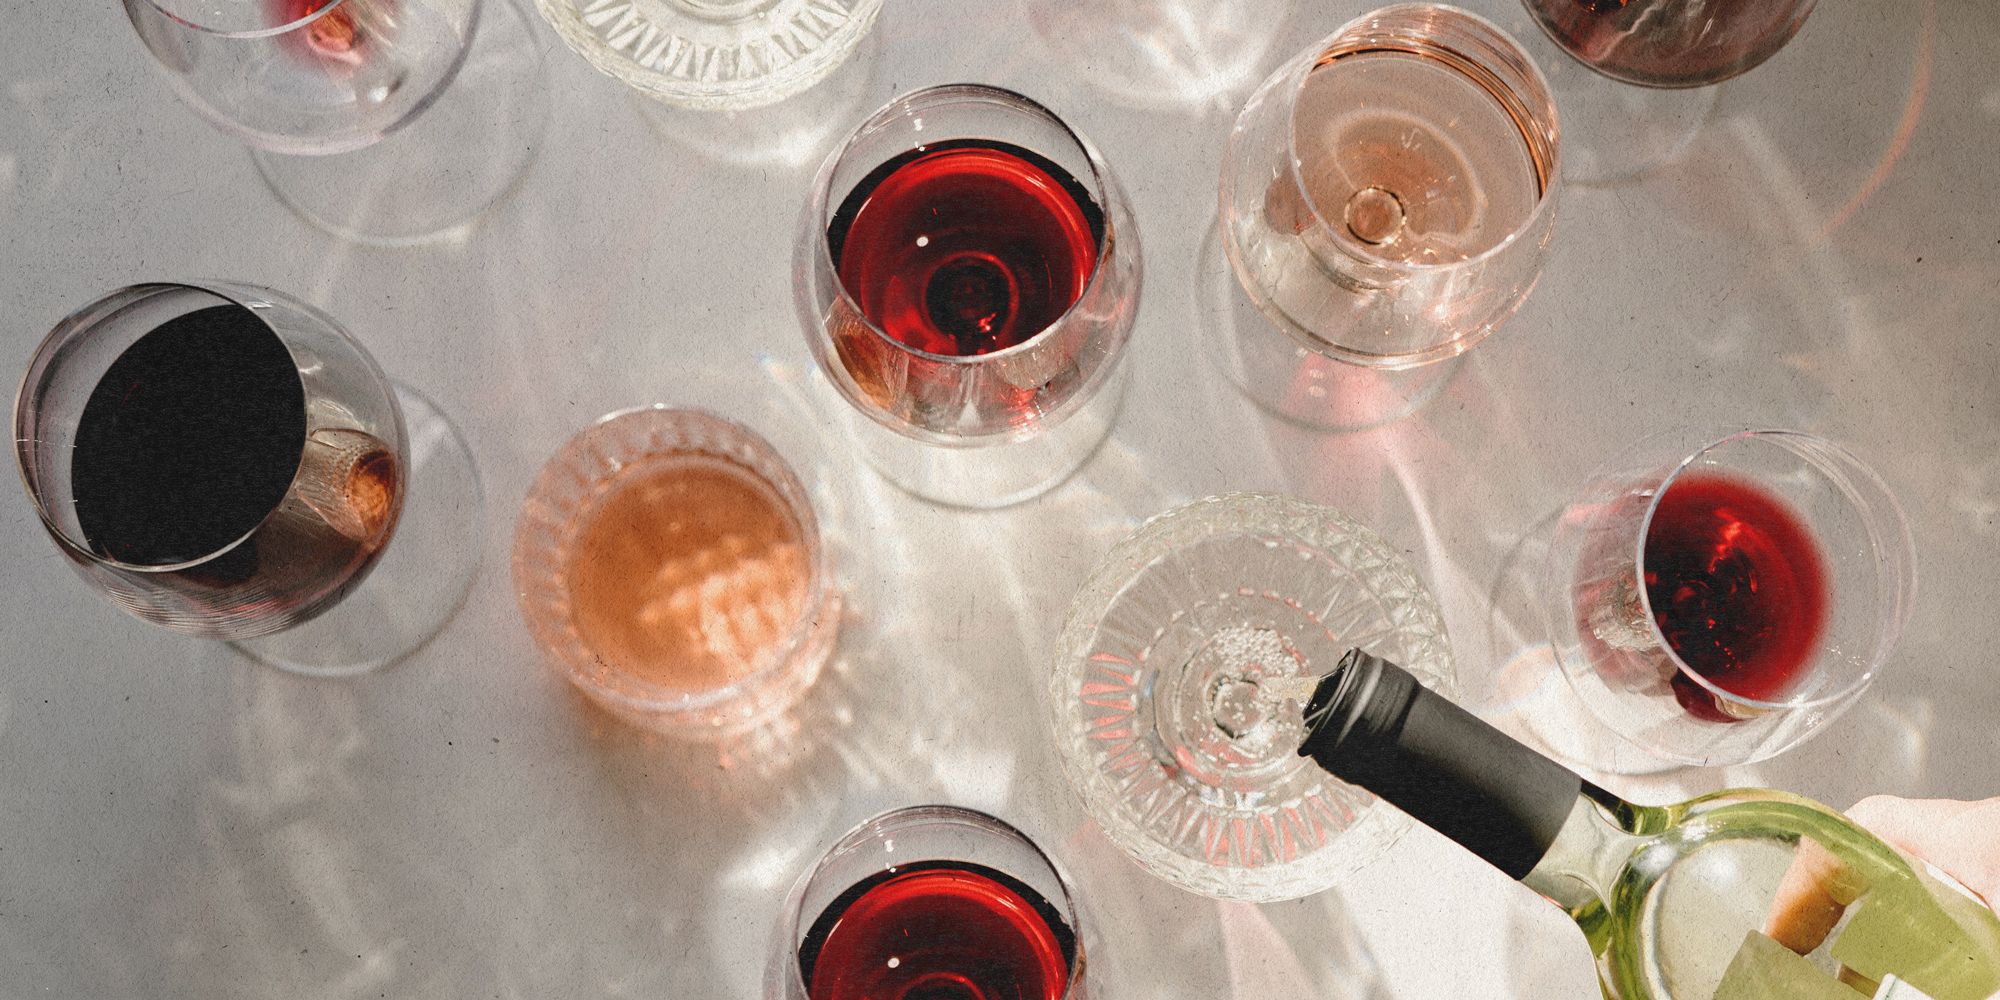 The 10 Best Budget-Friendly Wine Glasses Under $10